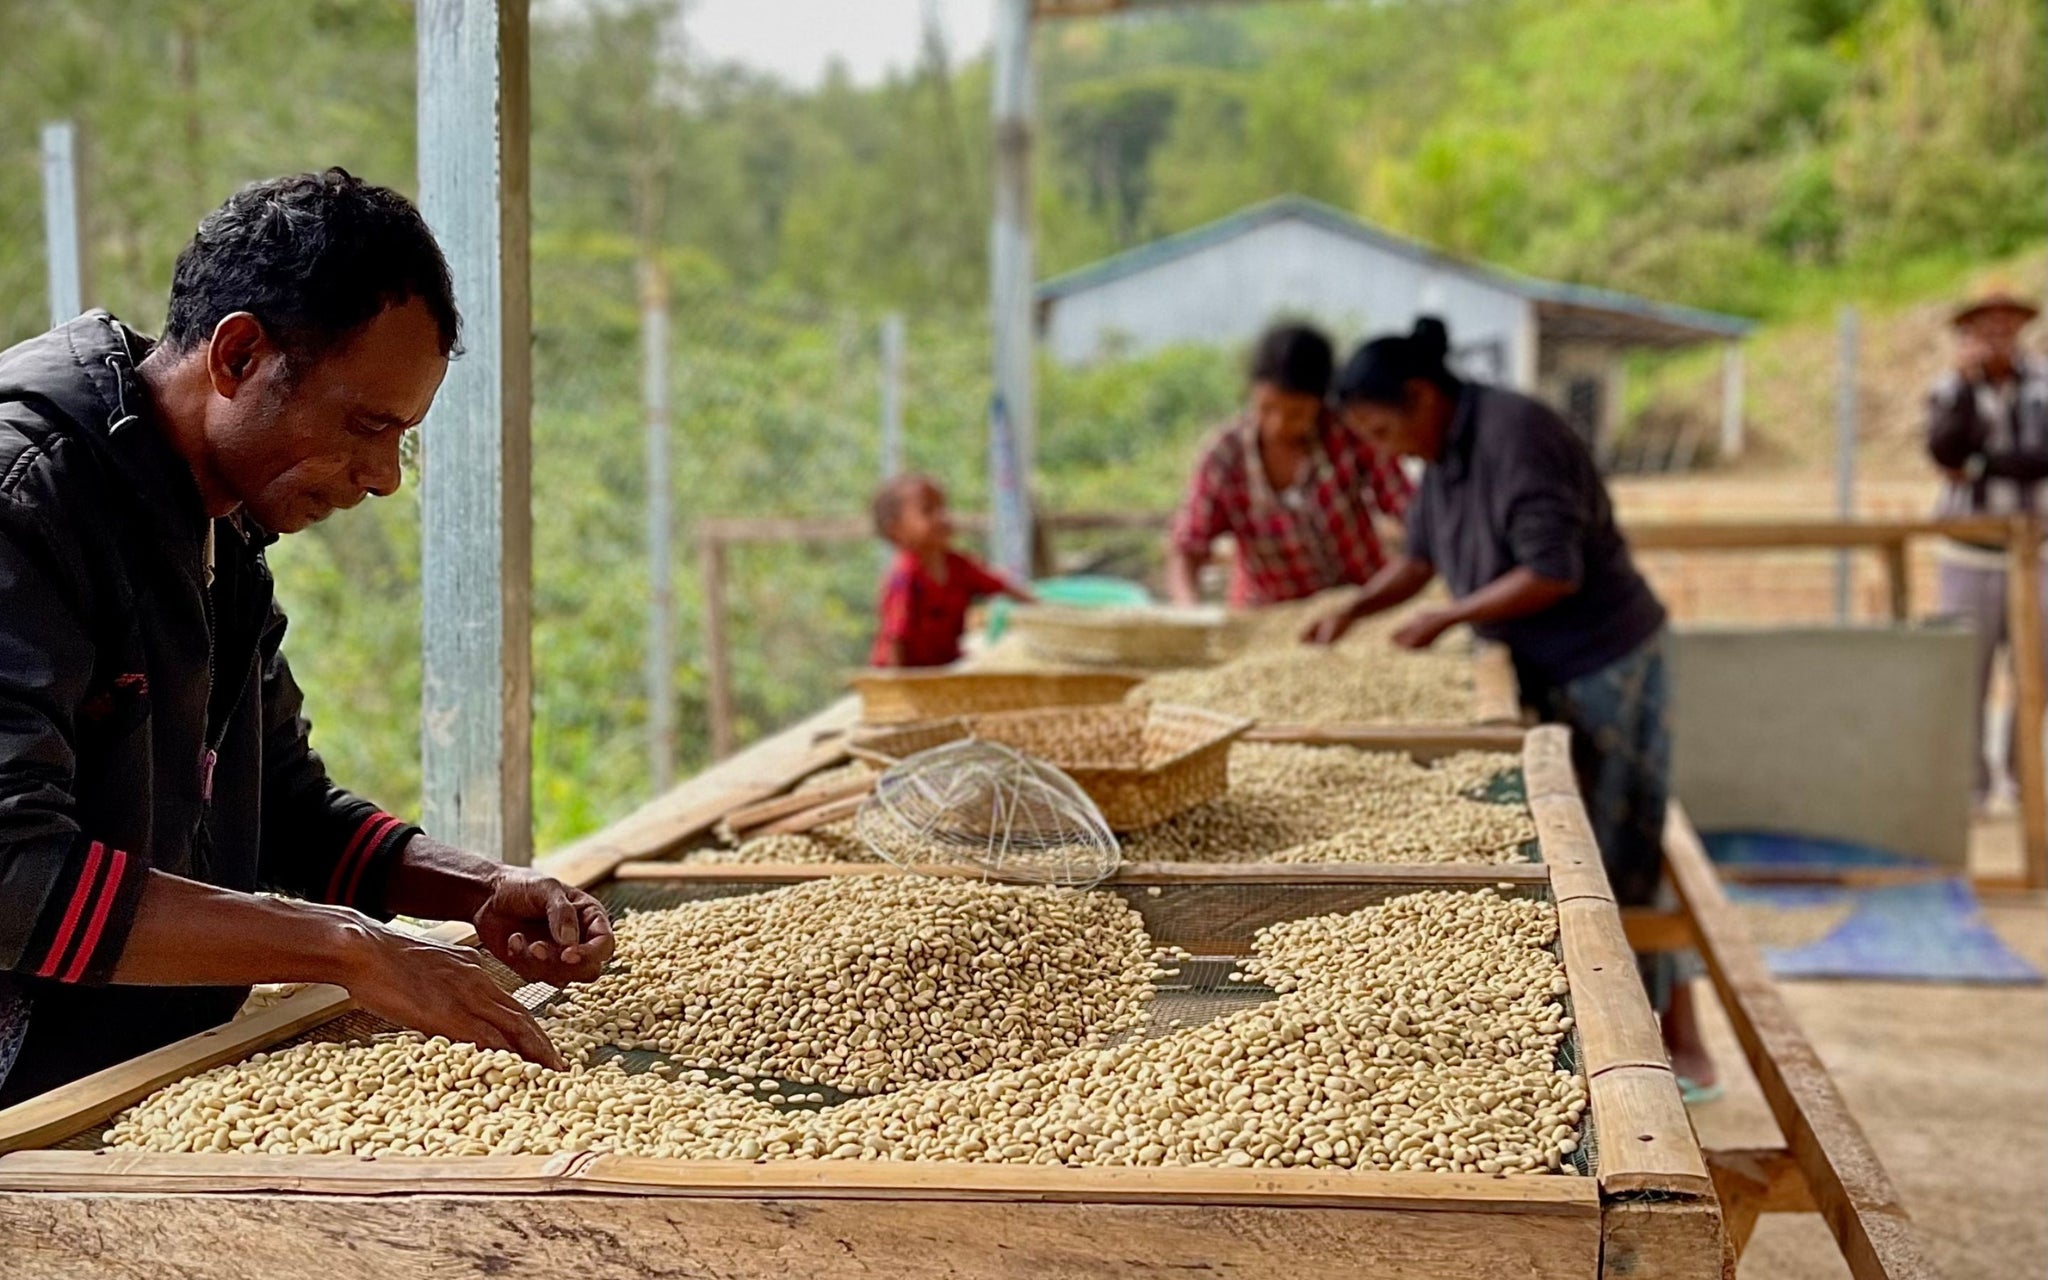 Members of the Rotutu Cooperative processing coffee beans